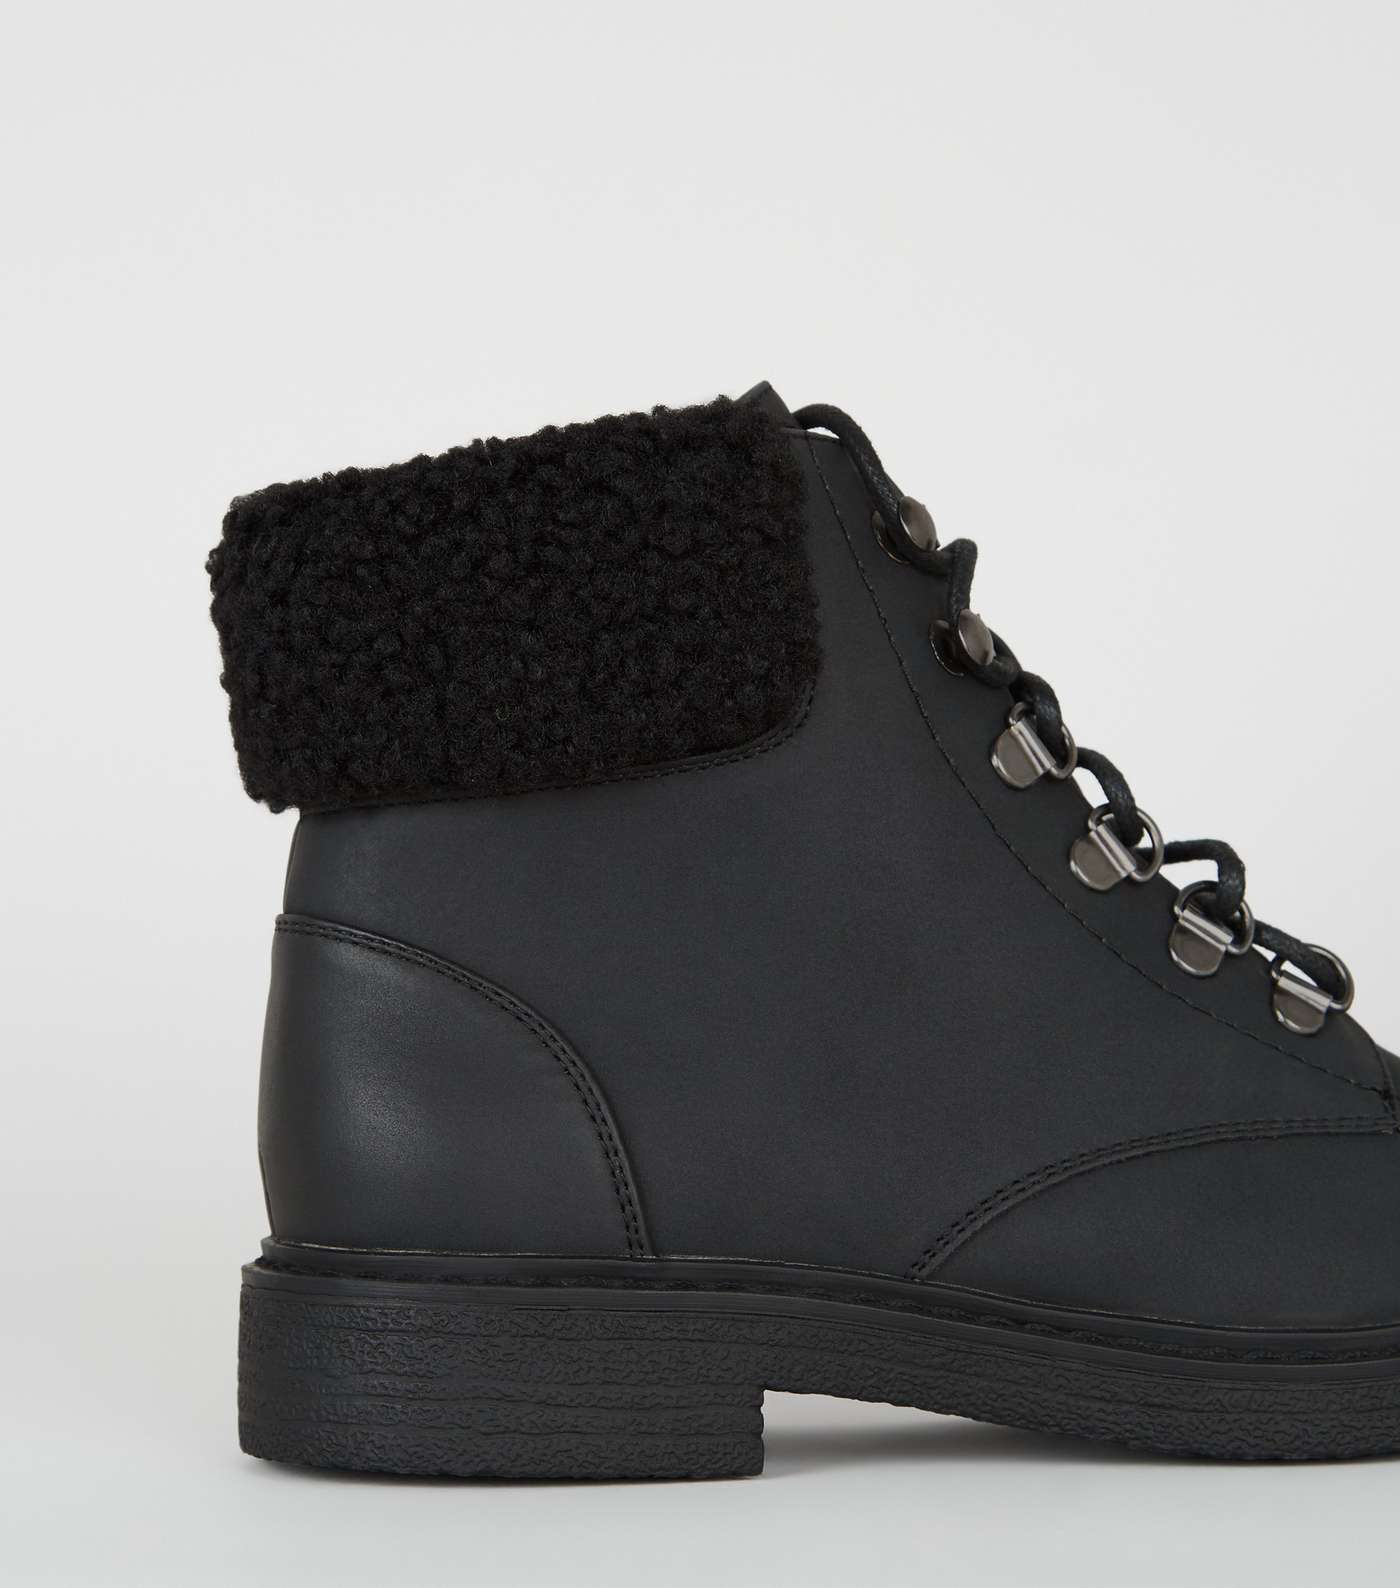 Girls Black Teddy Trim Lace Up Boots Image 4